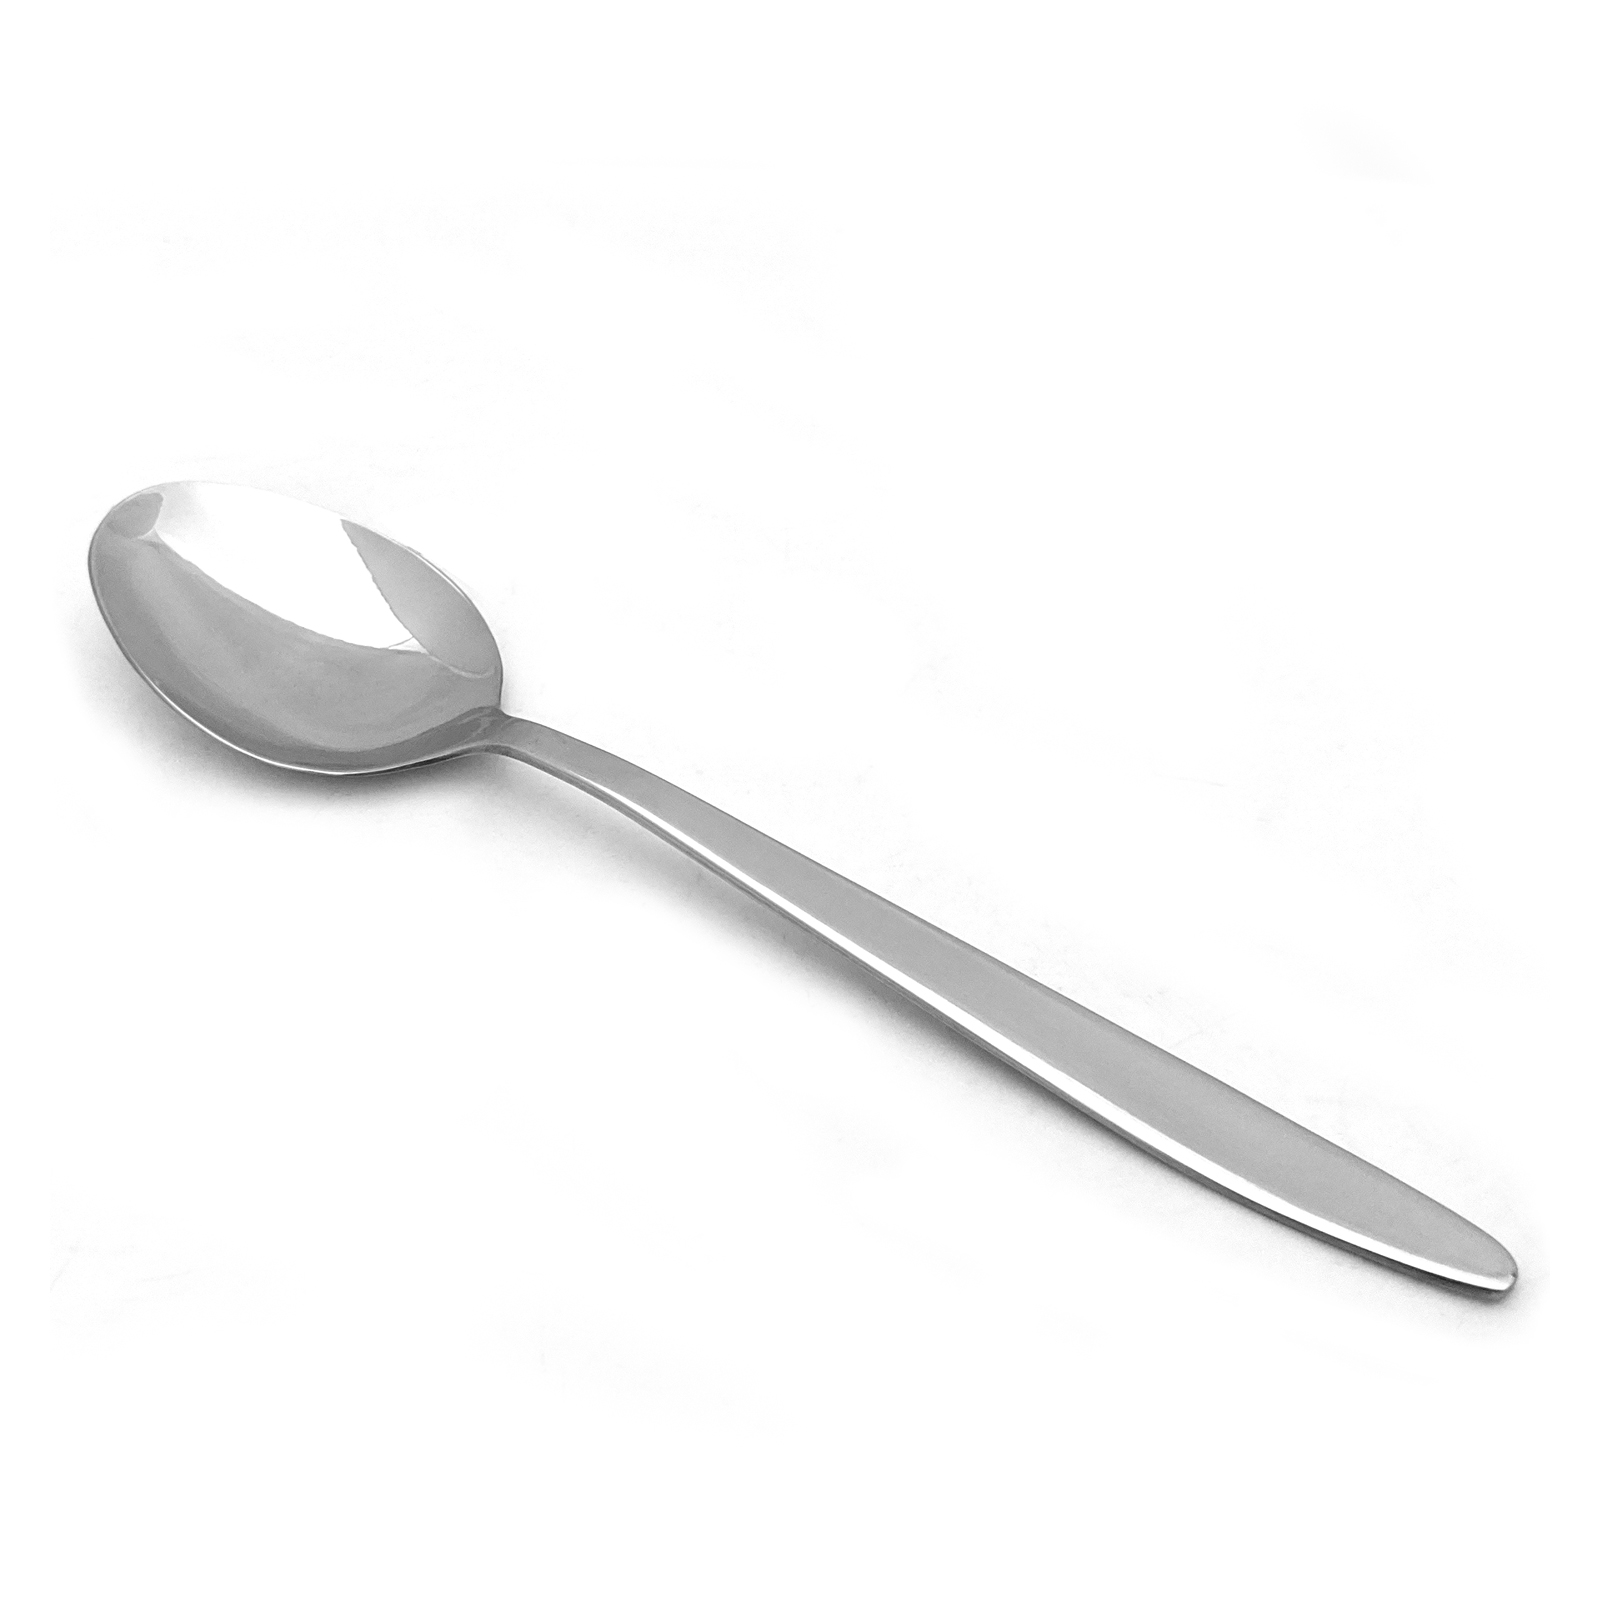 555 Plain Stainless Steel Table Spoon 2-pc Pack